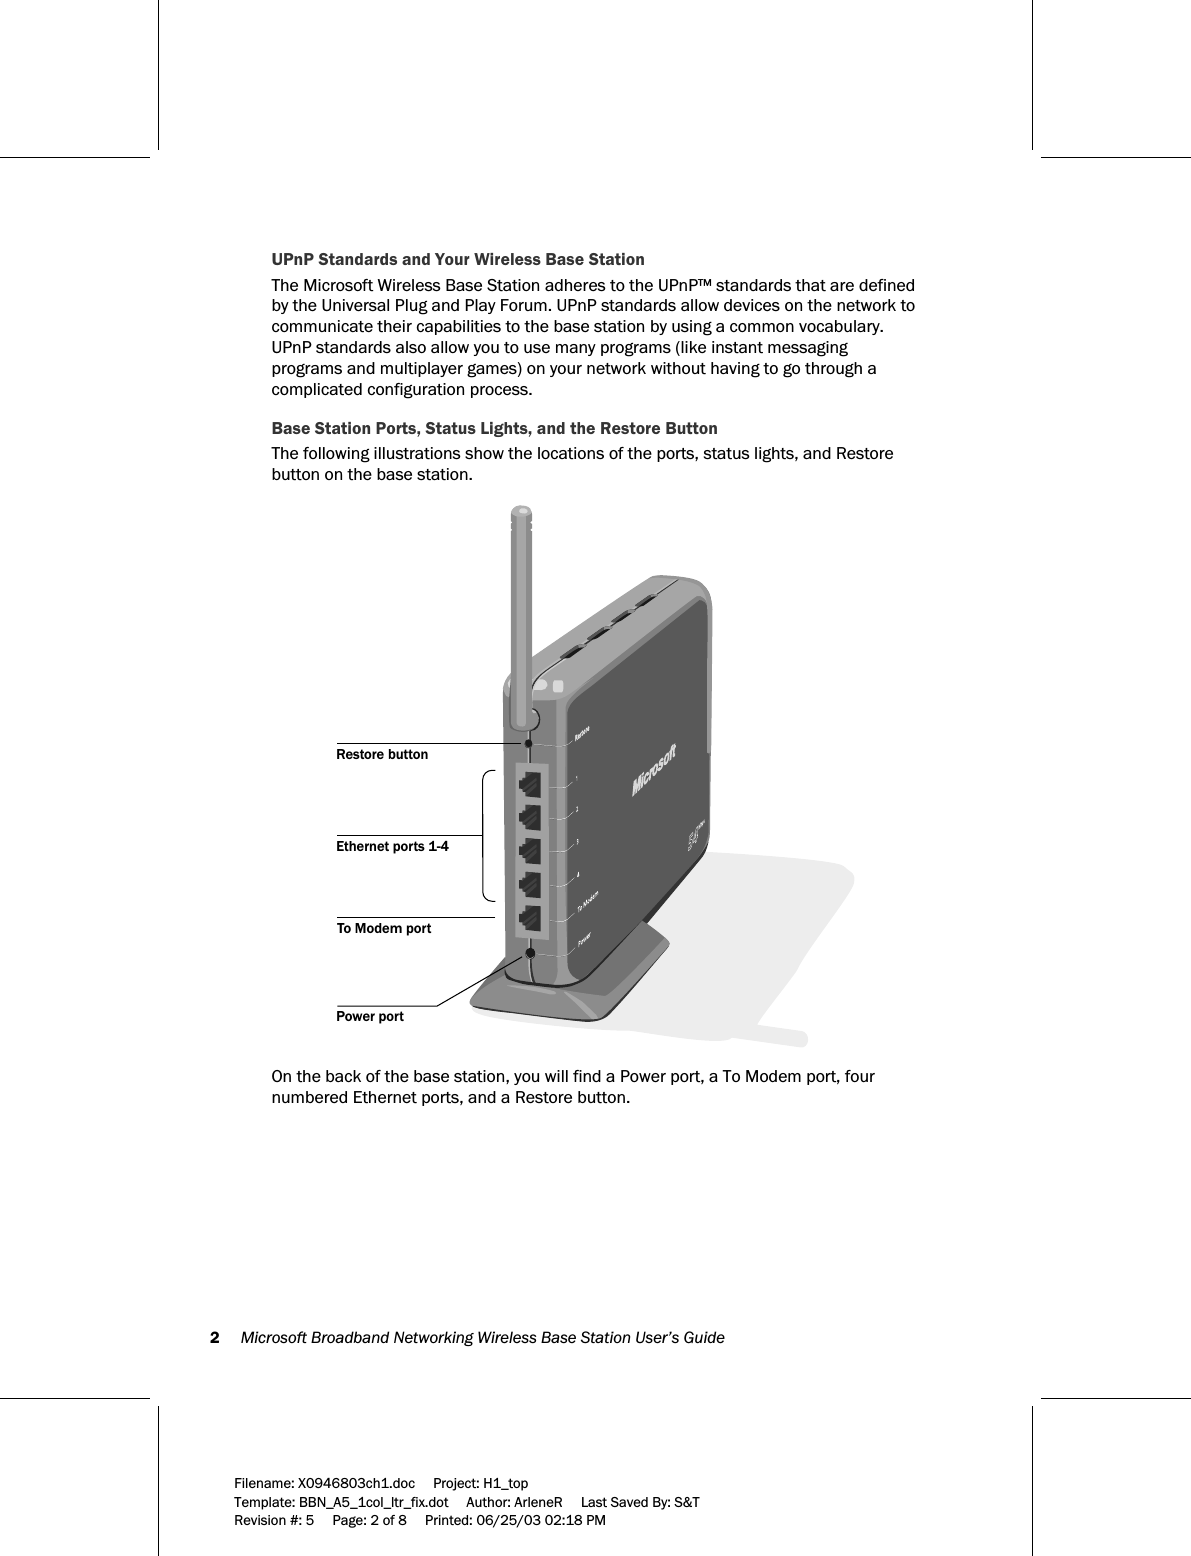 2     Microsoft Broadband Networking Wireless Base Station User’s Guide  Filename: X0946803ch1.doc     Project: H1_top    Template: BBN_A5_1col_ltr_fix.dot     Author: ArleneR     Last Saved By: S&amp;T Revision #: 5     Page: 2 of 8     Printed: 06/25/03 02:18 PM  UPnP Standards and Your Wireless Base Station The Microsoft Wireless Base Station adheres to the UPnP™ standards that are defined by the Universal Plug and Play Forum. UPnP standards allow devices on the network to communicate their capabilities to the base station by using a common vocabulary. UPnP standards also allow you to use many programs (like instant messaging programs and multiplayer games) on your network without having to go through a complicated configuration process. Base Station Ports, Status Lights, and the Restore Button The following illustrations show the locations of the ports, status lights, and Restore button on the base station.   To Modem portEthernet ports 1-4Restore buttonPower port  On the back of the base station, you will find a Power port, a To Modem port, four numbered Ethernet ports, and a Restore button.  